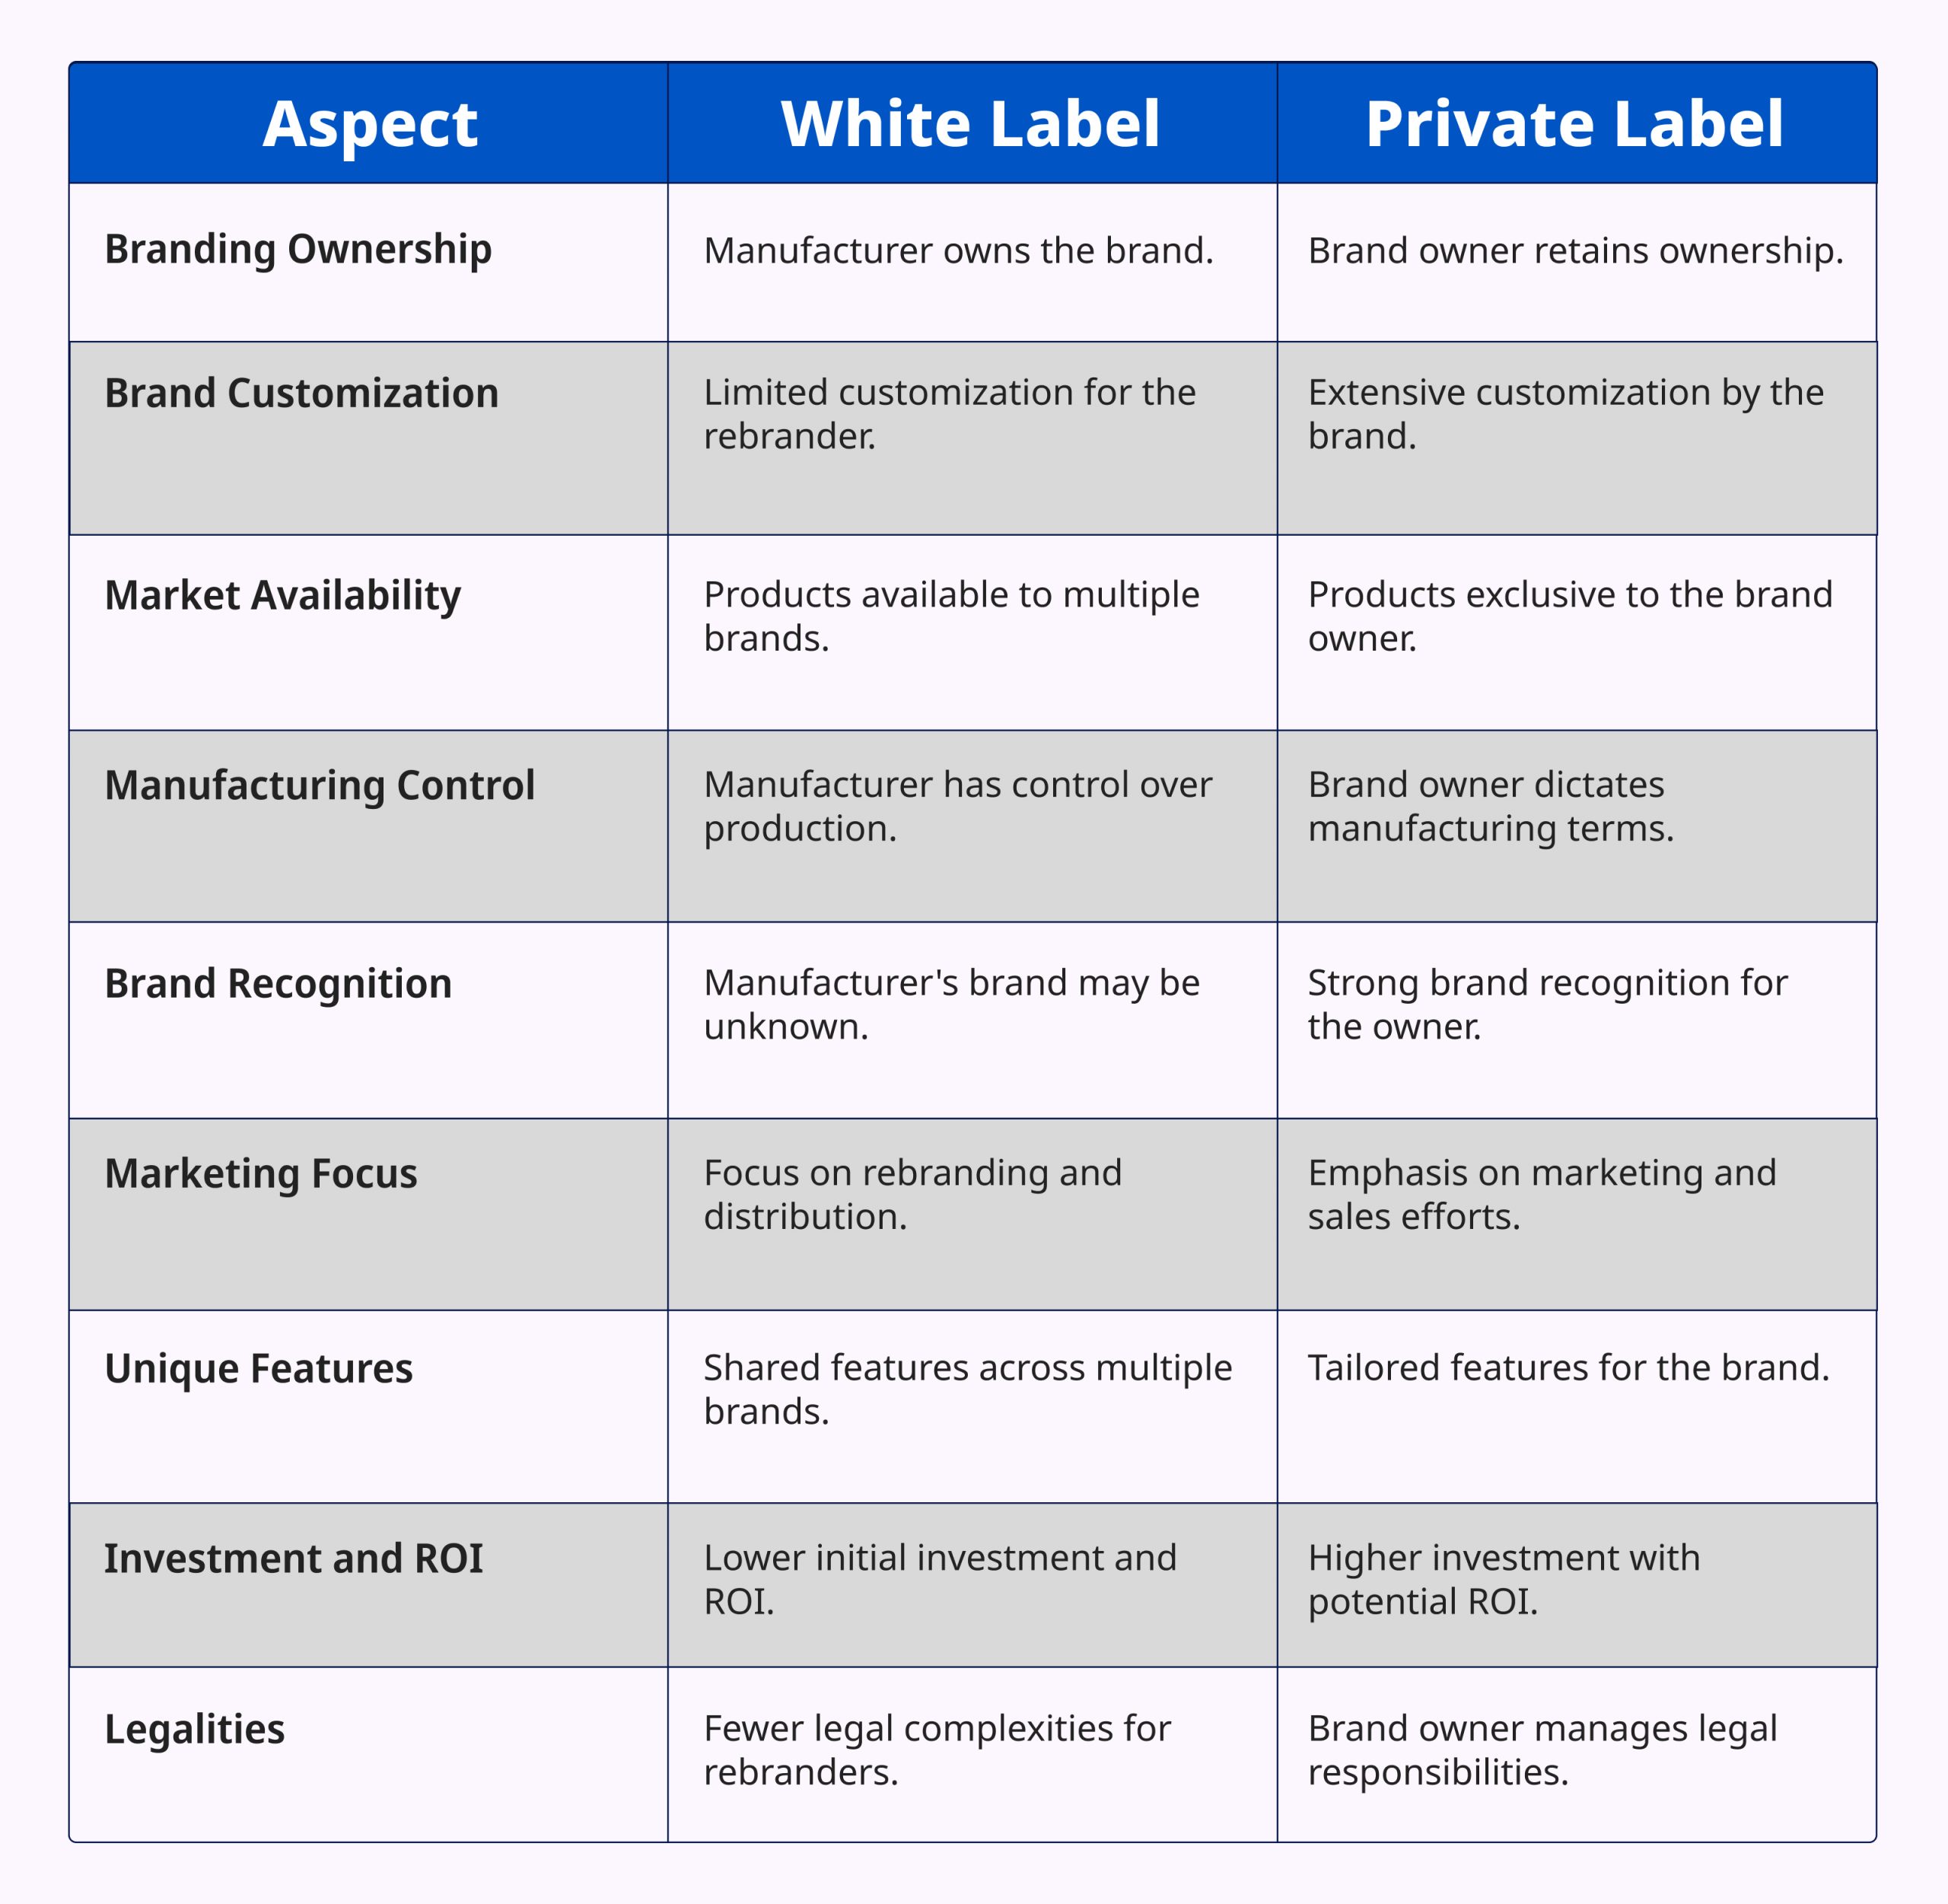 Difference Between White Label and Private Label